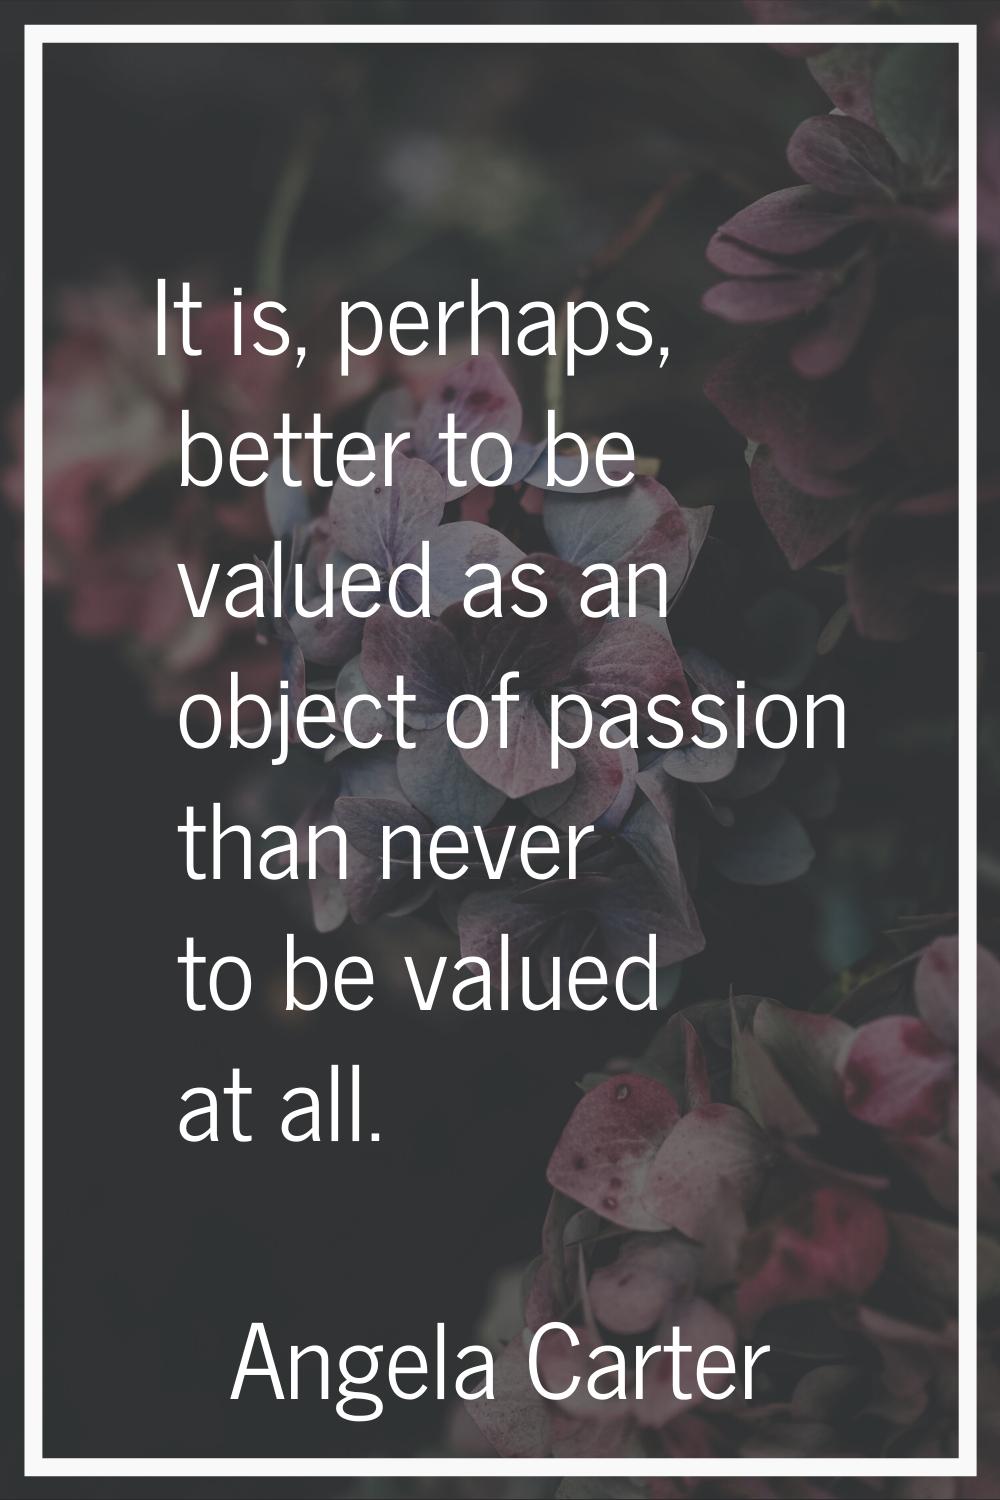 It is, perhaps, better to be valued as an object of passion than never to be valued at all.